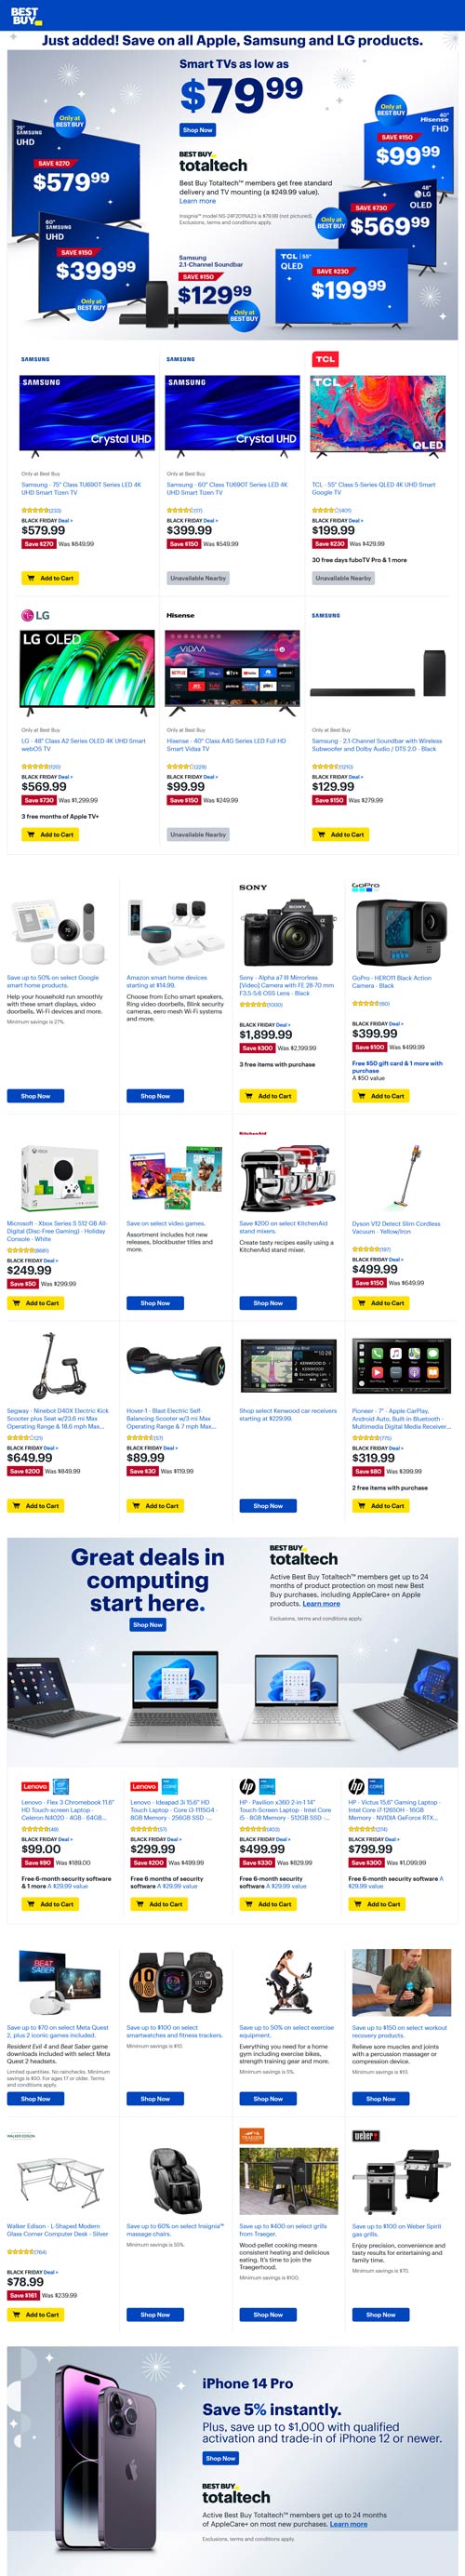 Best Buy stores Coupon  All Samsung, Apple & LG products discounted at Best Buy #bestbuy 